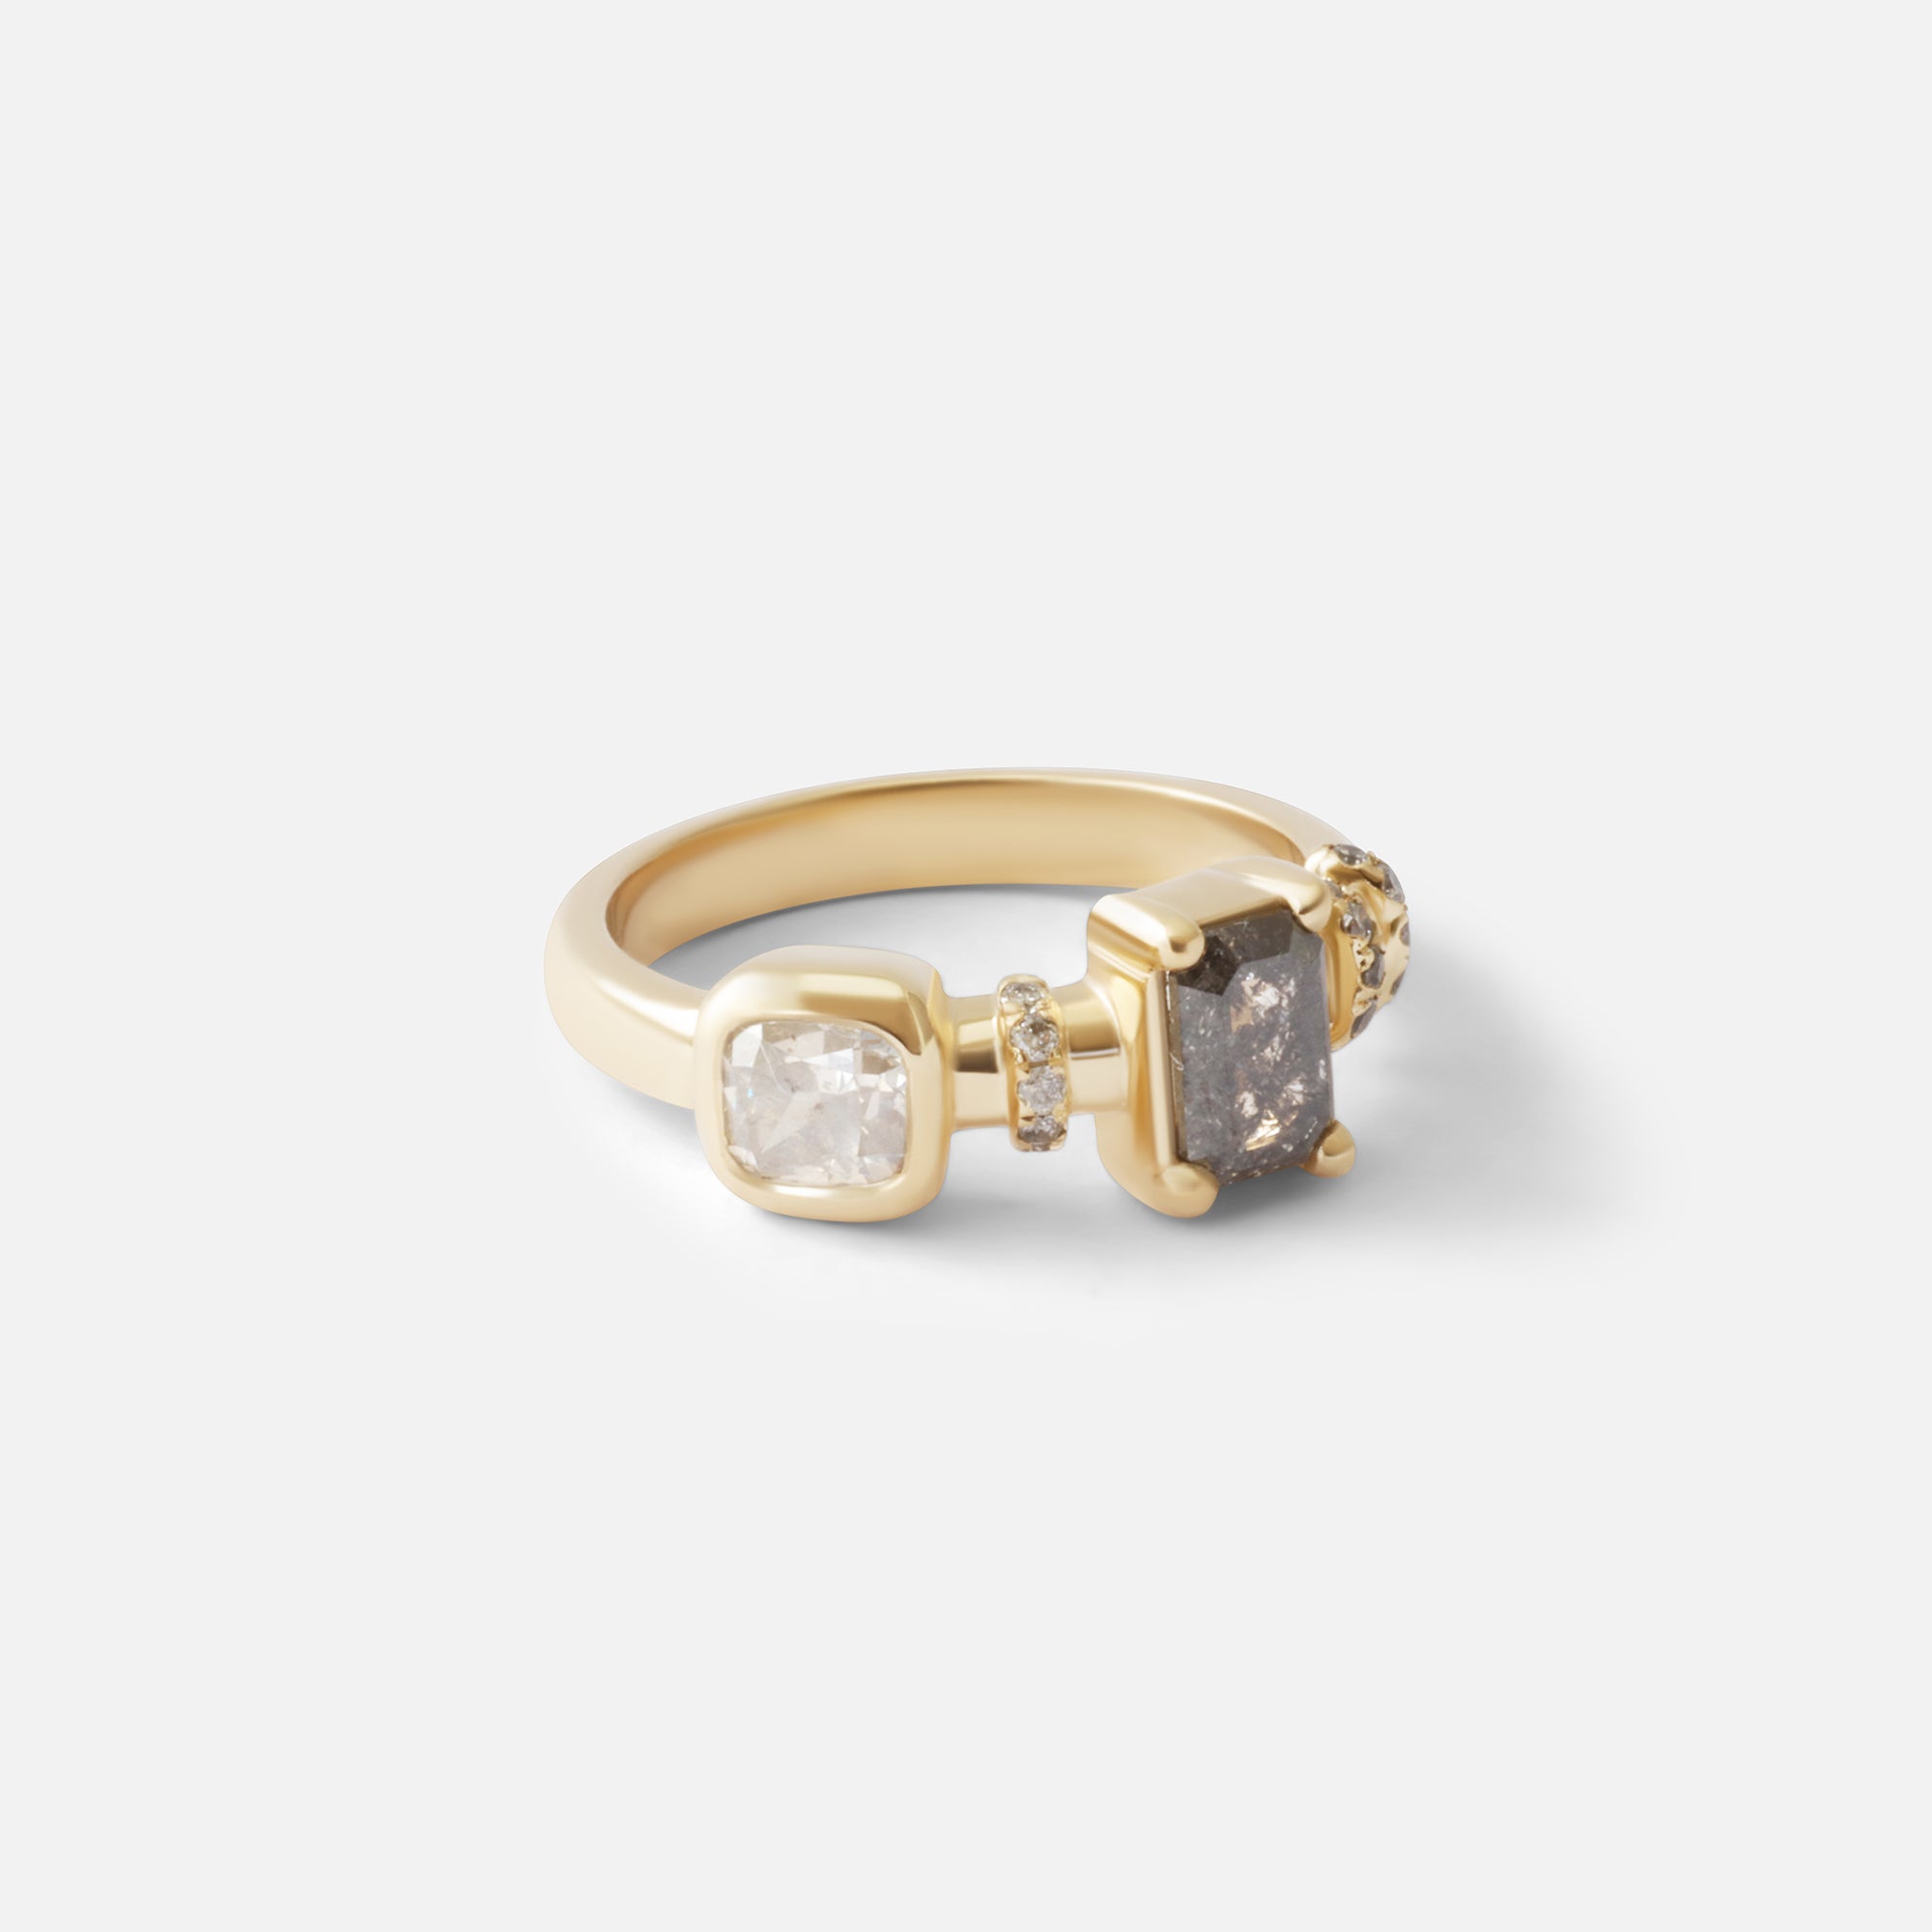 Nebula / Diamond IV Ring By Alfonzo in rings Category